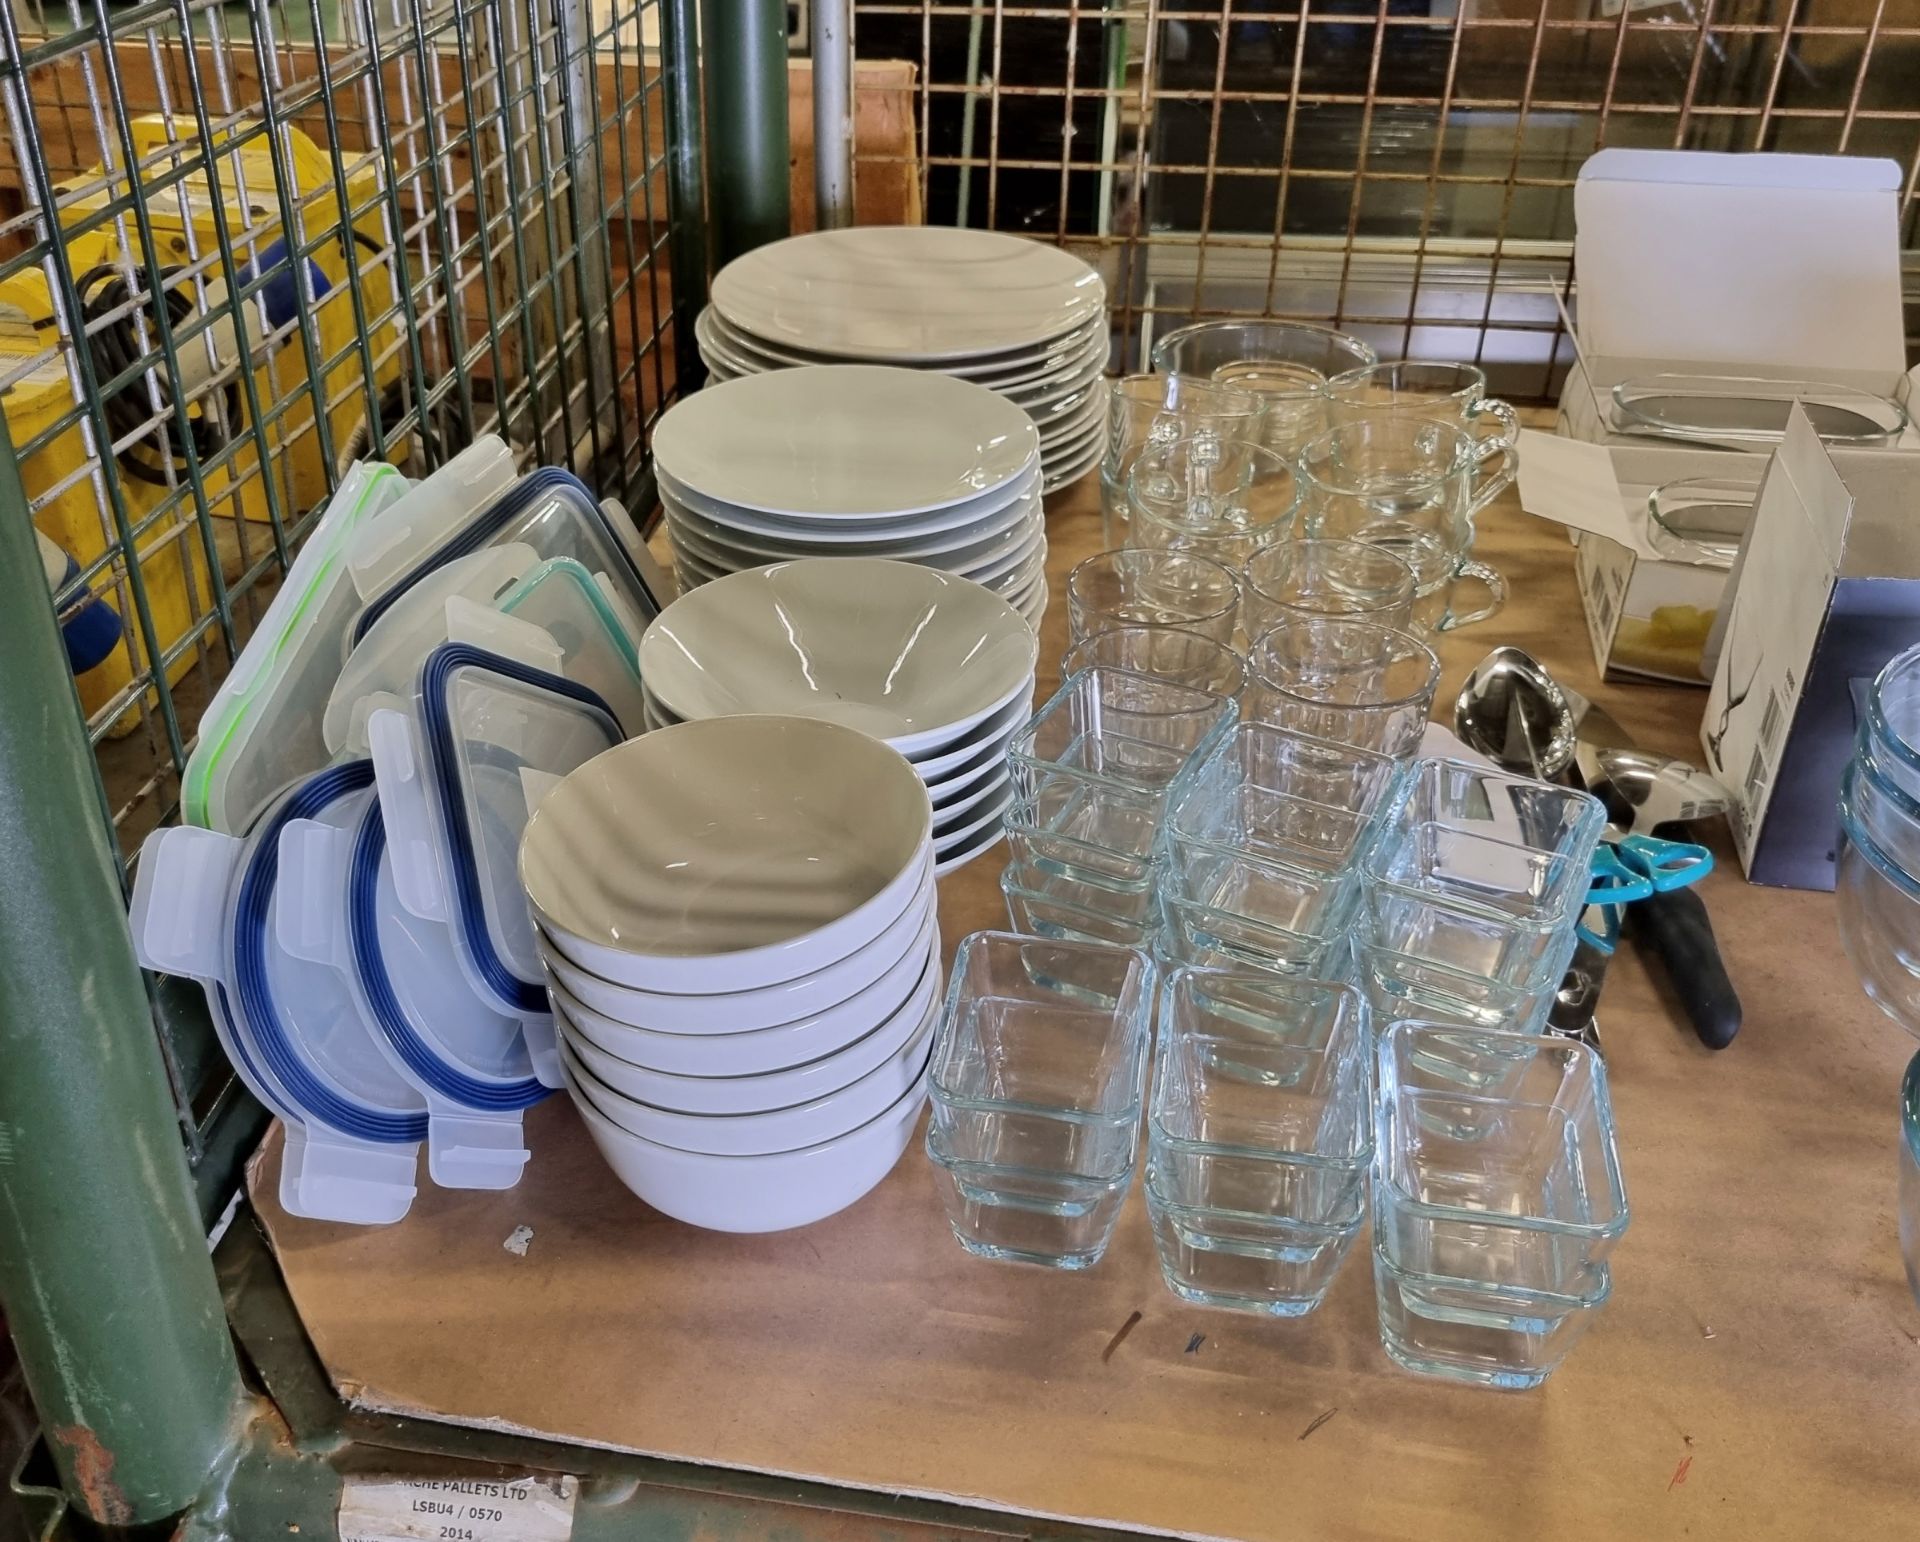 Catering equipment : plates, dishes, bowls, utensils, jars with candle lights - Bild 4 aus 4